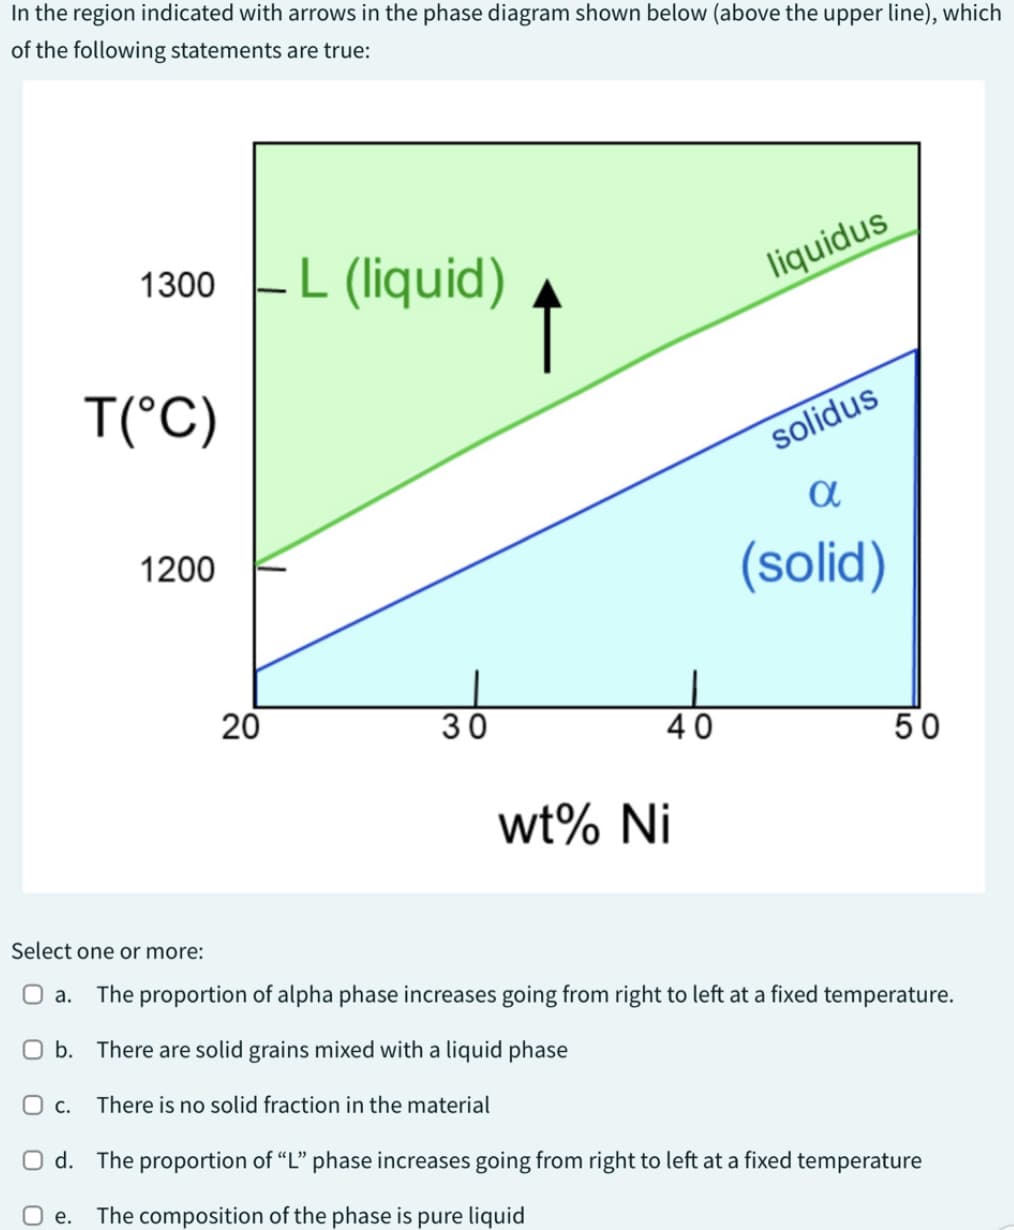 In the region indicated with arrows in the phase diagram shown below (above the upper line), which
of the following statements are true:
1300
O b.
O c.
T(°C)
1200
20
L (liquid)
30
↑
40
wt% Ni
liquidus
solidus
α
(solid)
50
Select one or more:
O a. The proportion of alpha phase increases going from right to left at a fixed temperature.
There are solid grains mixed with a liquid phase
There is no solid fraction in the material
Od. The proportion of "L" phase increases going from right to left at a fixed temperature
Oe. The composition of the phase is pure liquid